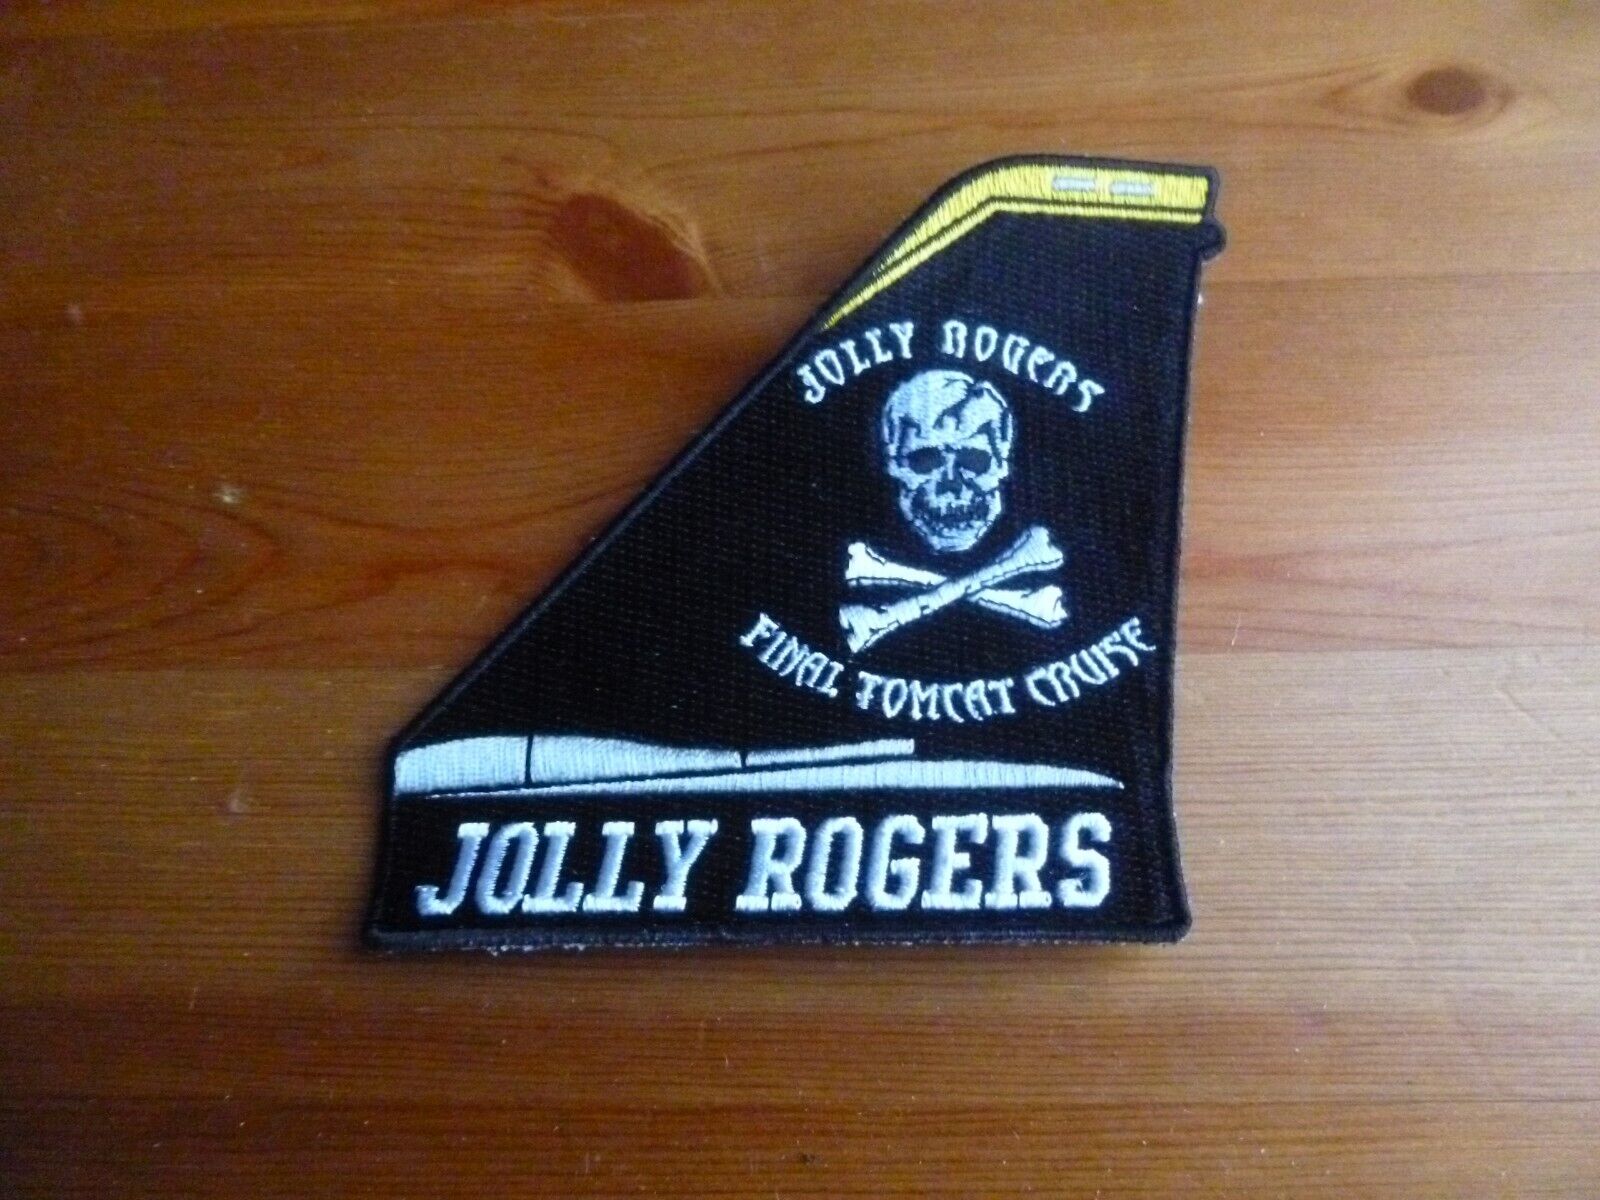 VF-103 Jolly Rogers Tail Patch Final Cruise Nas Oceana F-14 Tomcat US Navy CVW